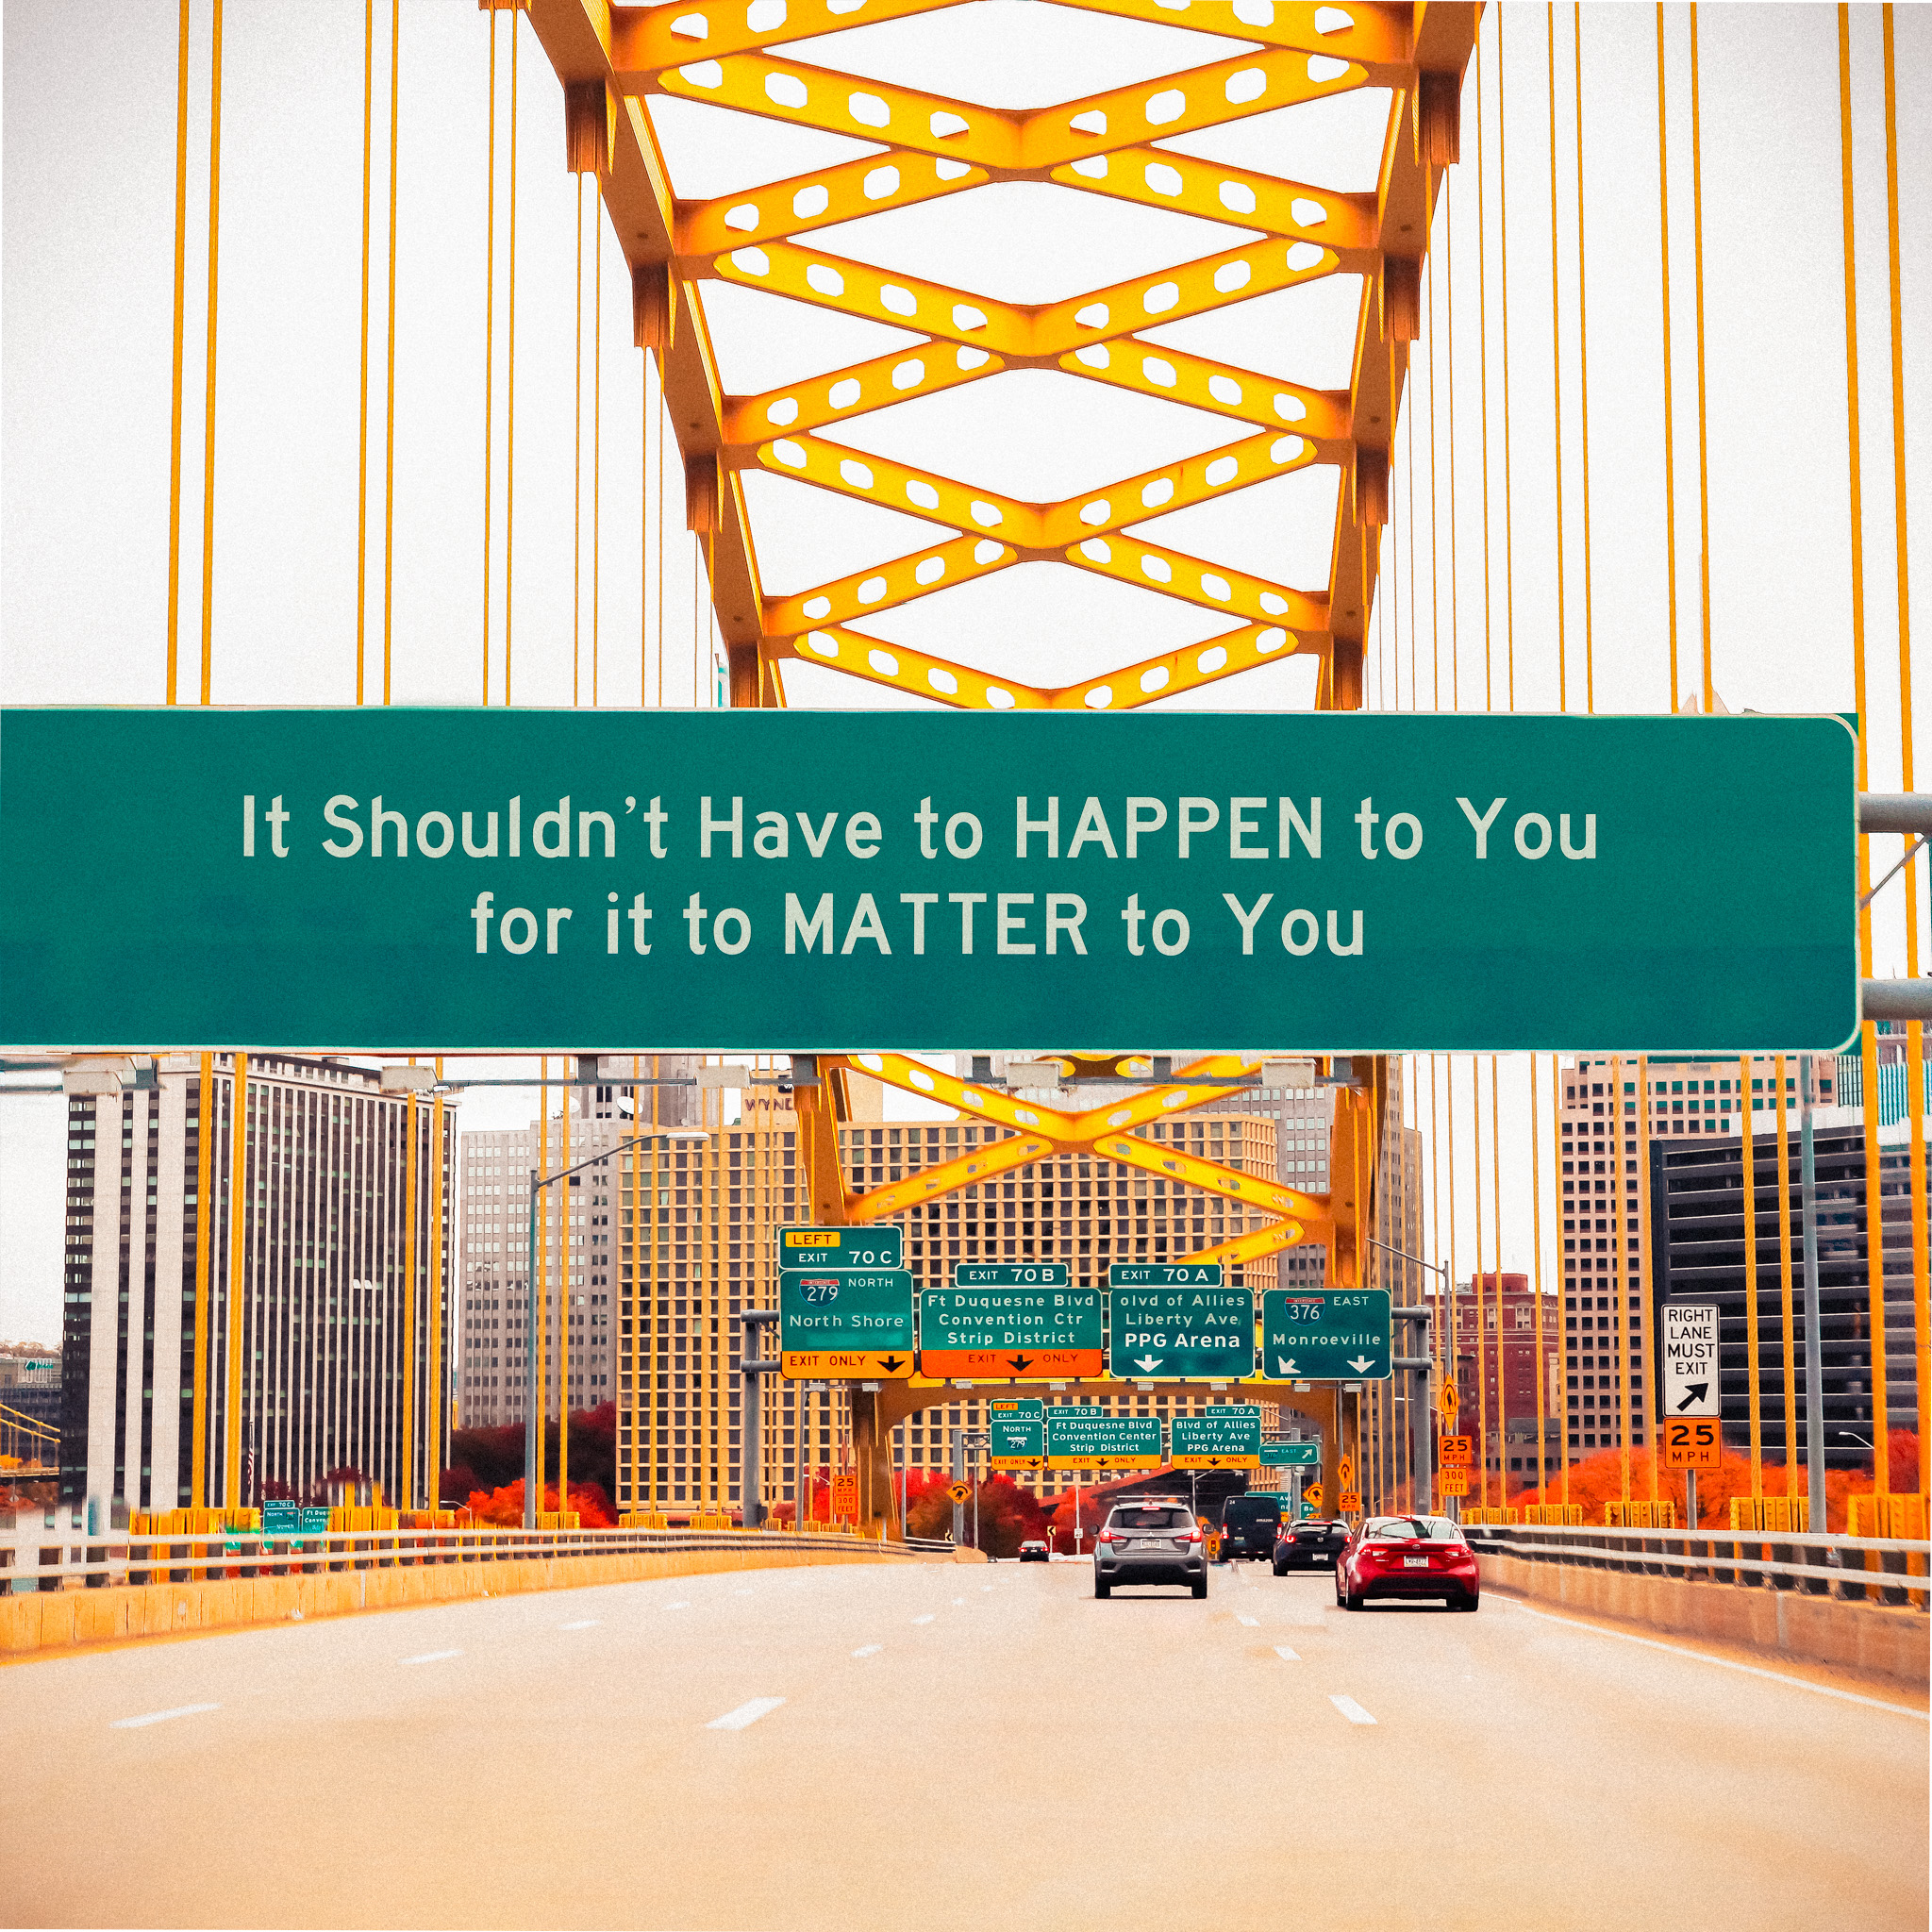 Road sign leading into the city of Pittsburgh that reads "It shouldn't have to happen to you for it to matter to you."